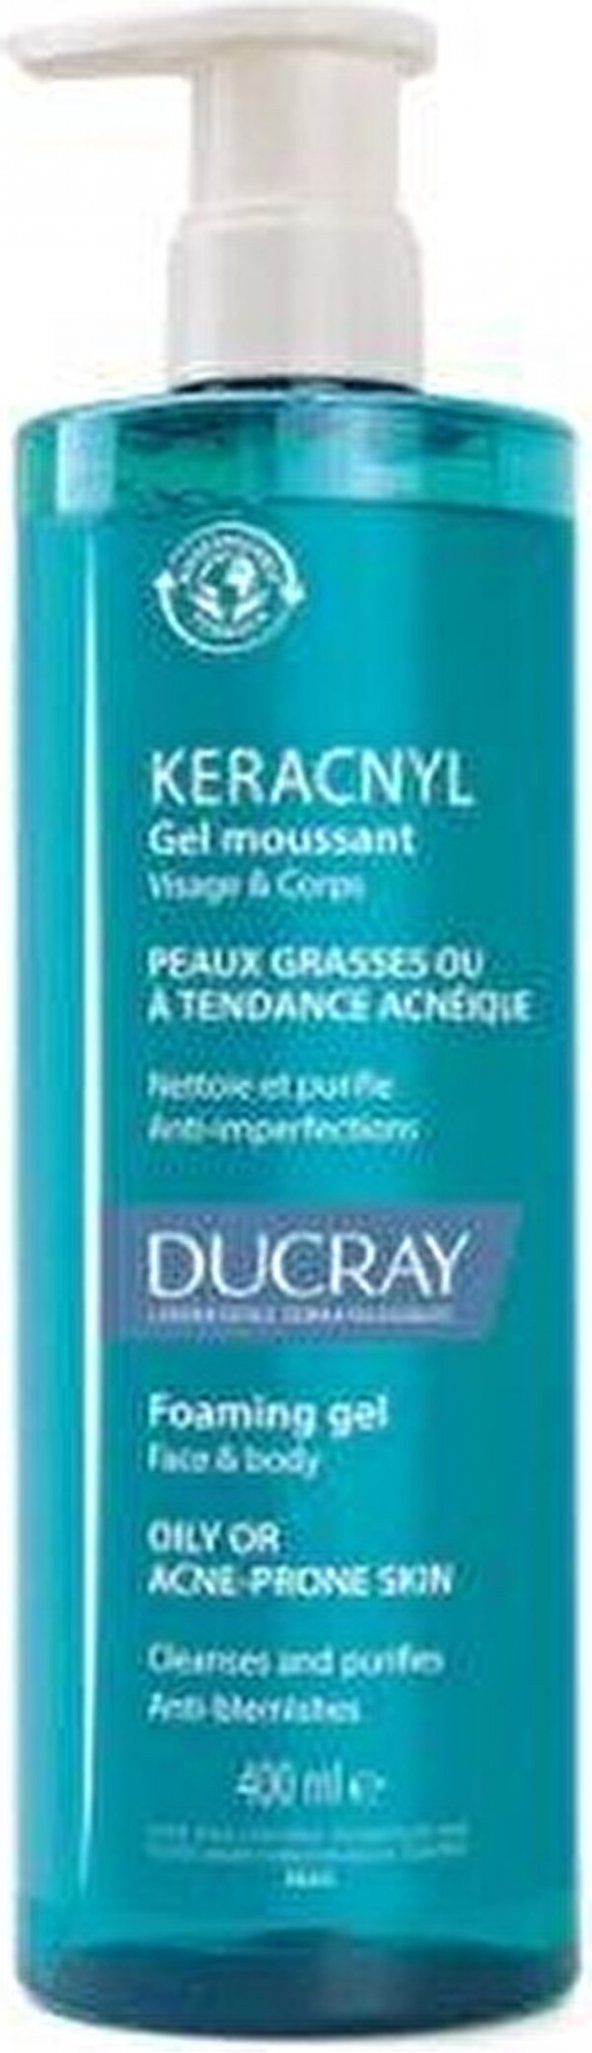 Ducray Kerancnly Gel Moussant 400 ml